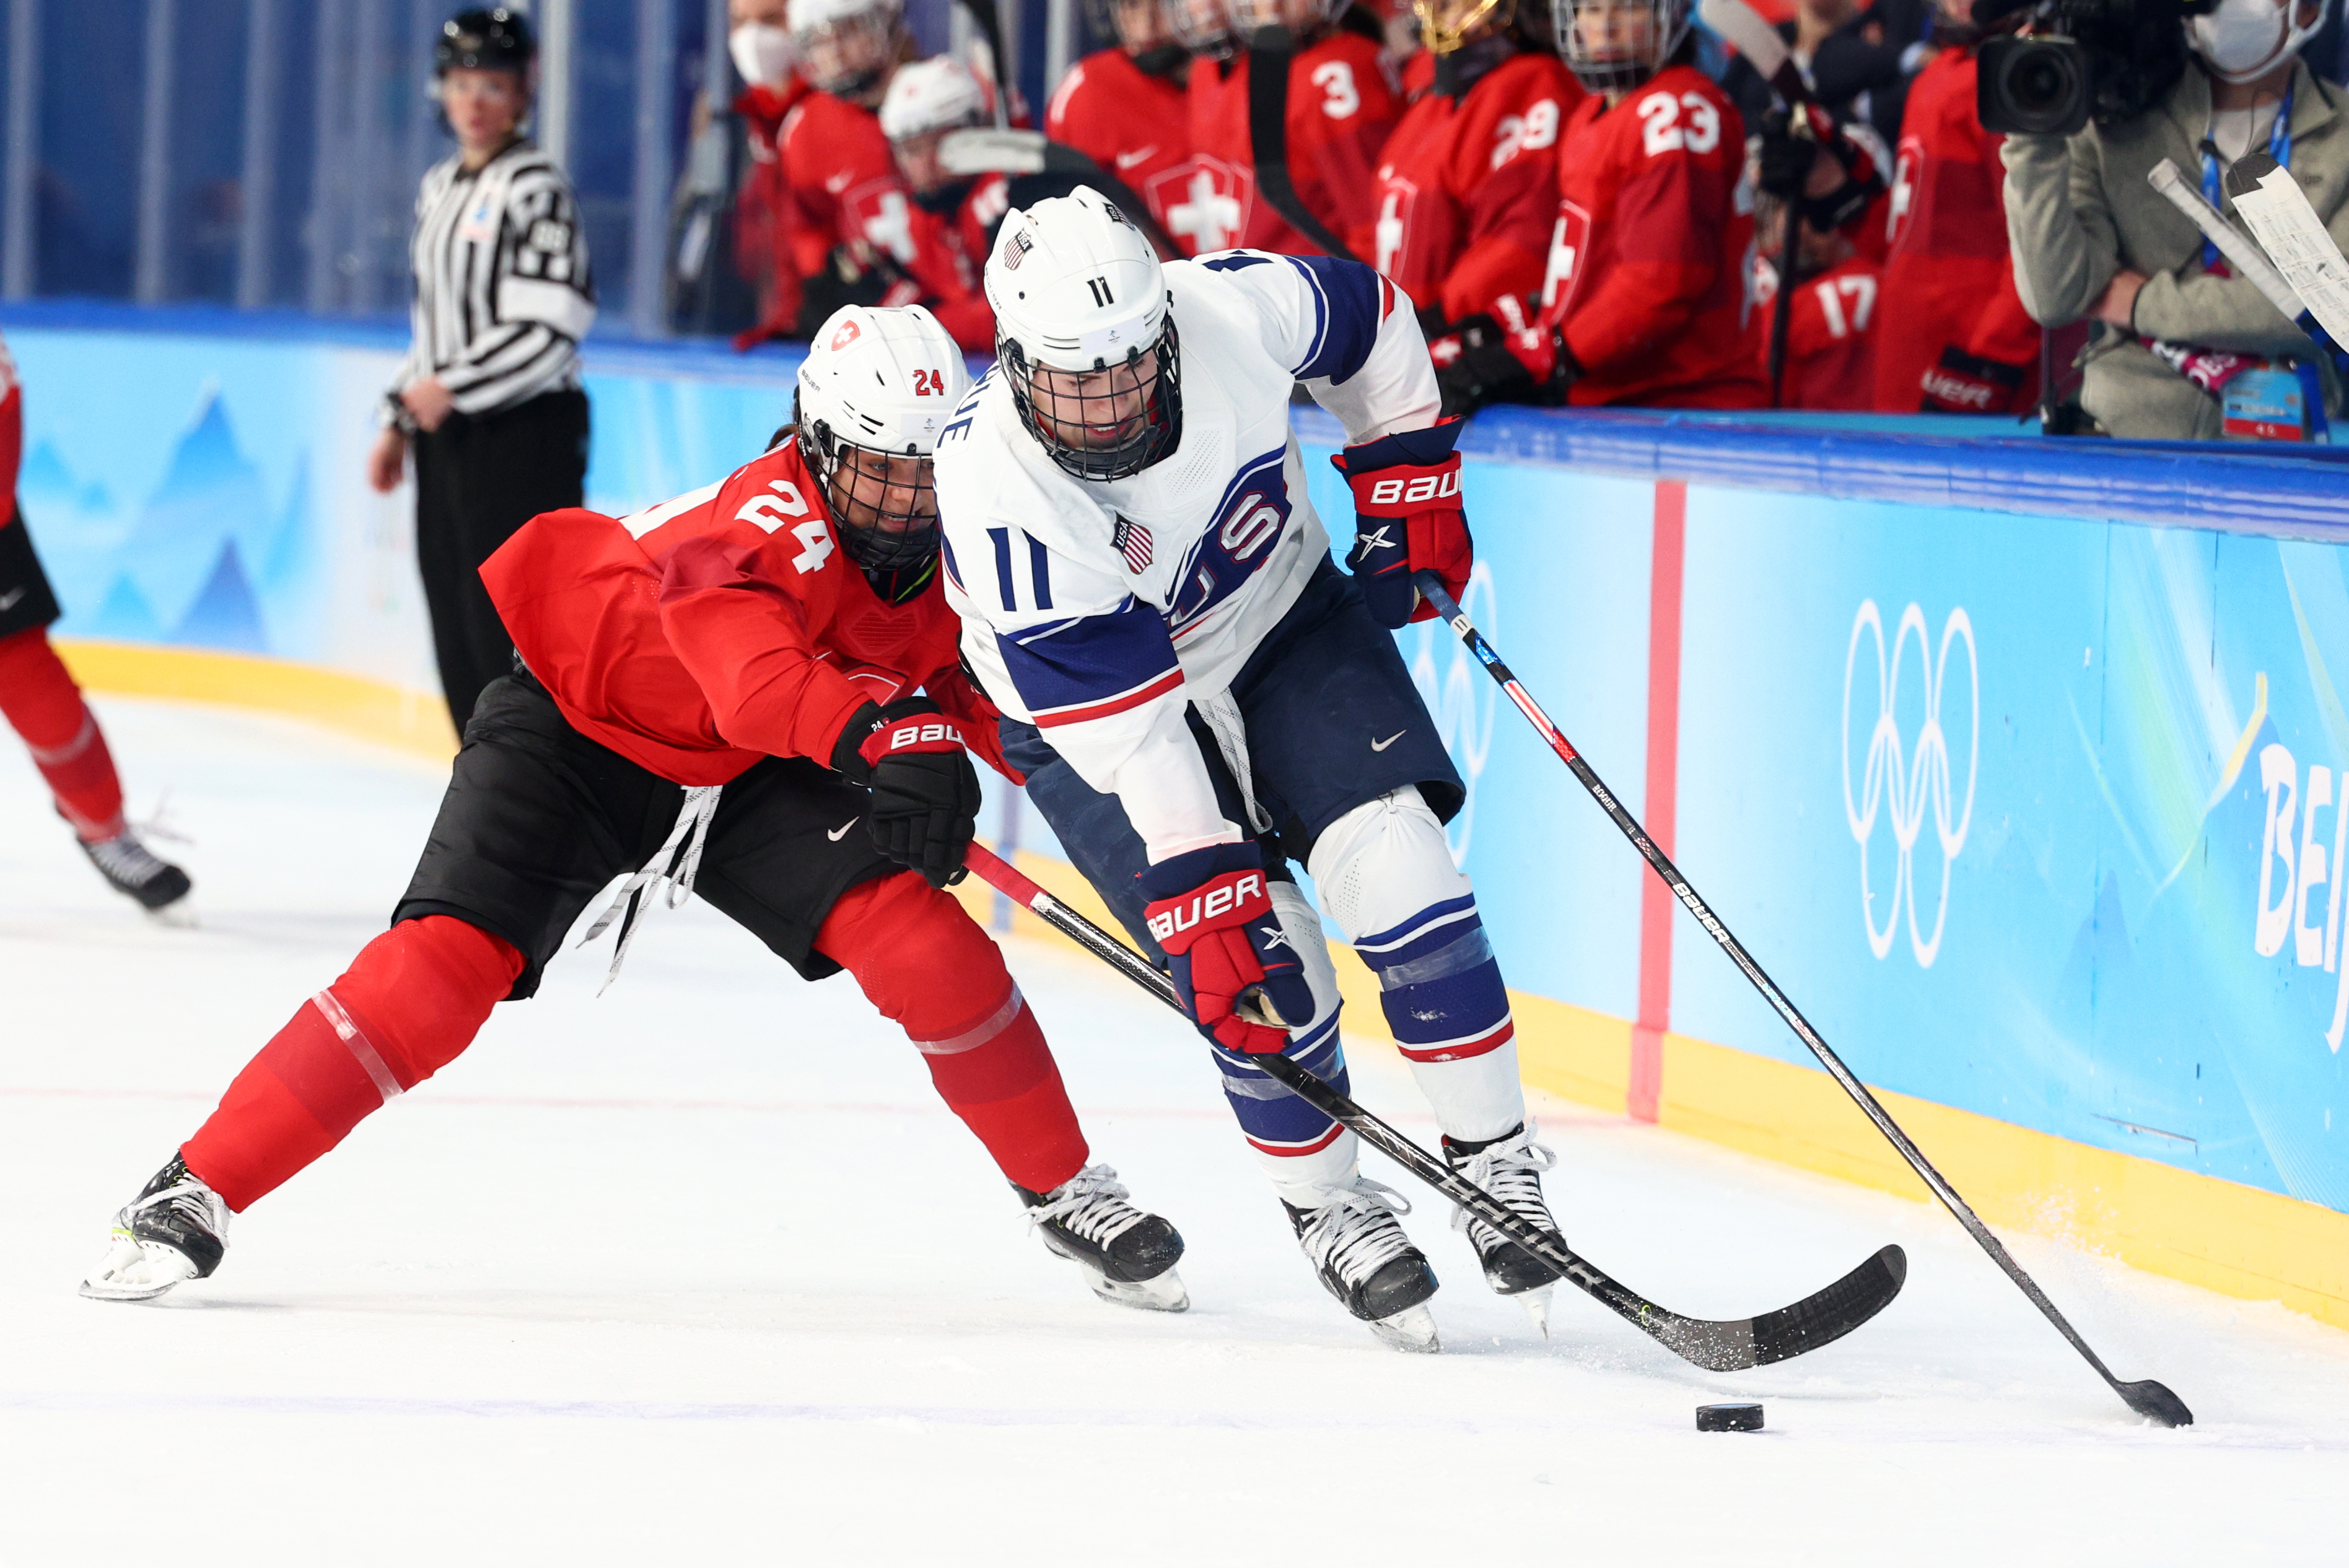 Olympic Hockey Overtime, Shootout Rules – And How the NHLs Compare